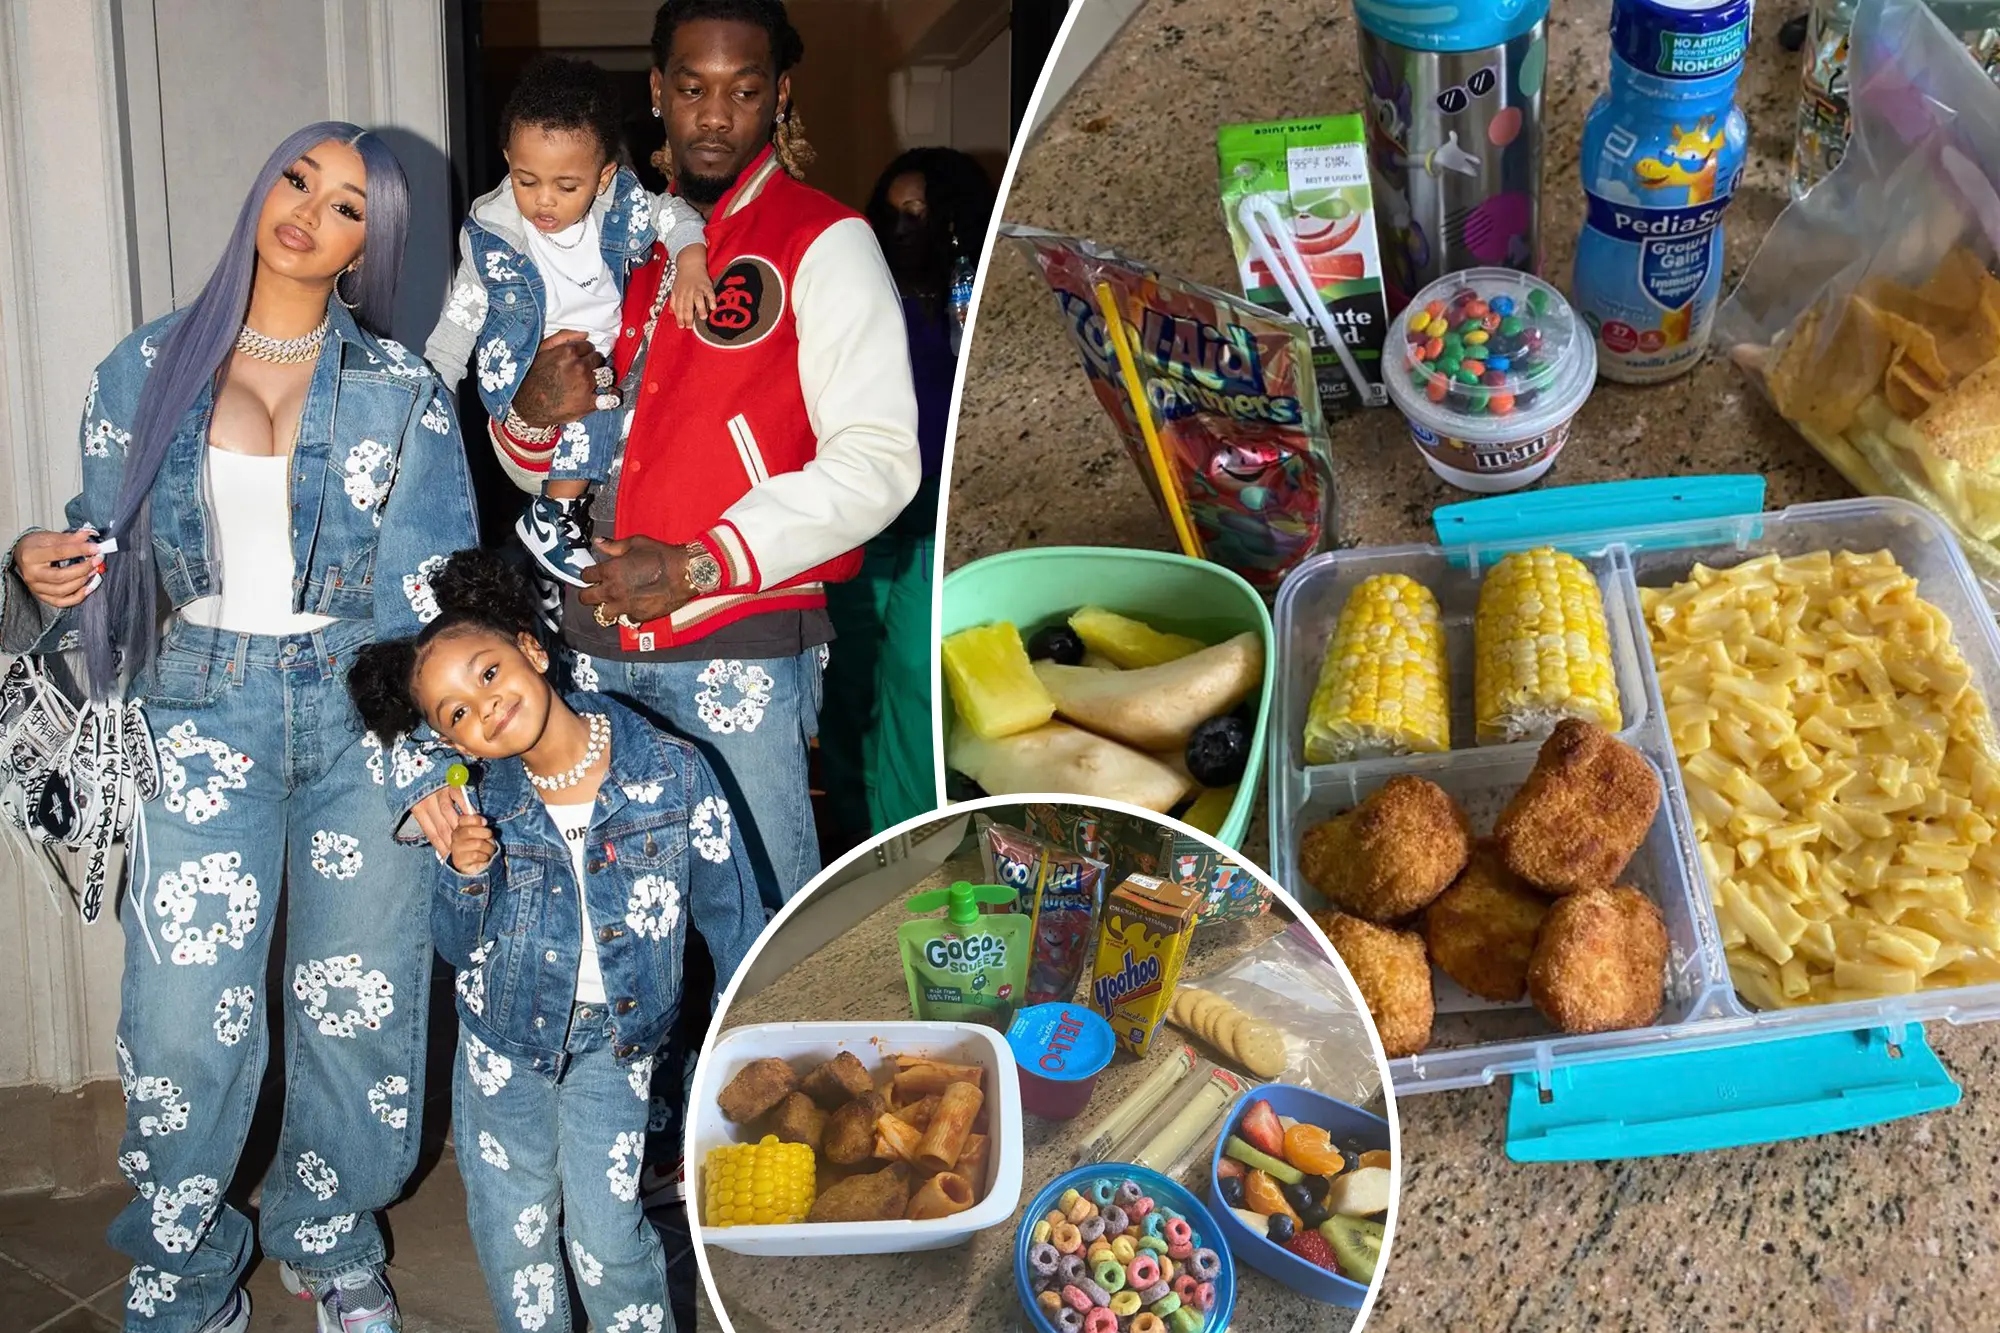 People Want Cardi B To Adopt Them After Seeing Her Daughter's Massive School Lunches